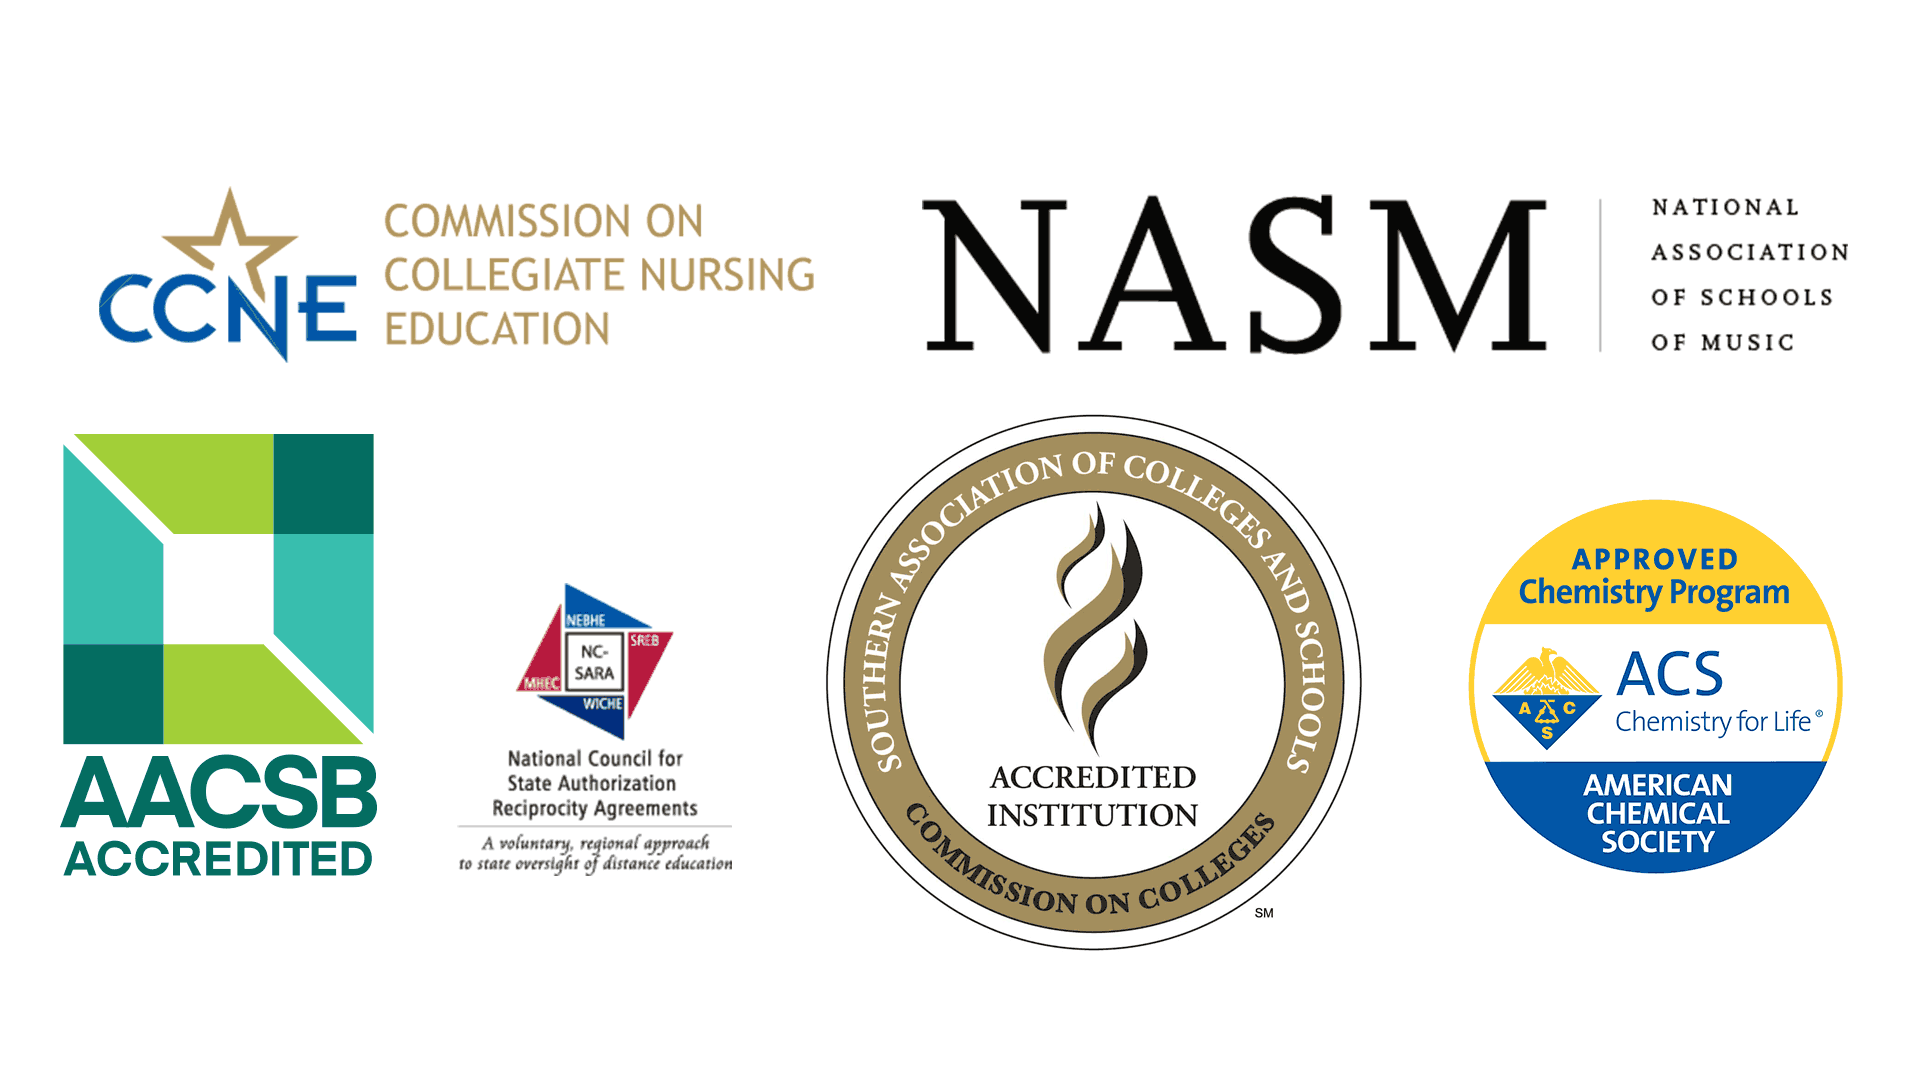 accreditation logos: Commission on Collegiate Nursing Education, National Association of Schools of Music, AACSB Accredited, National Council for State Authorization Reciprocity Agreements, Southern Association of Colleges and Schools, American Chemical Society Approved Chemistry Program